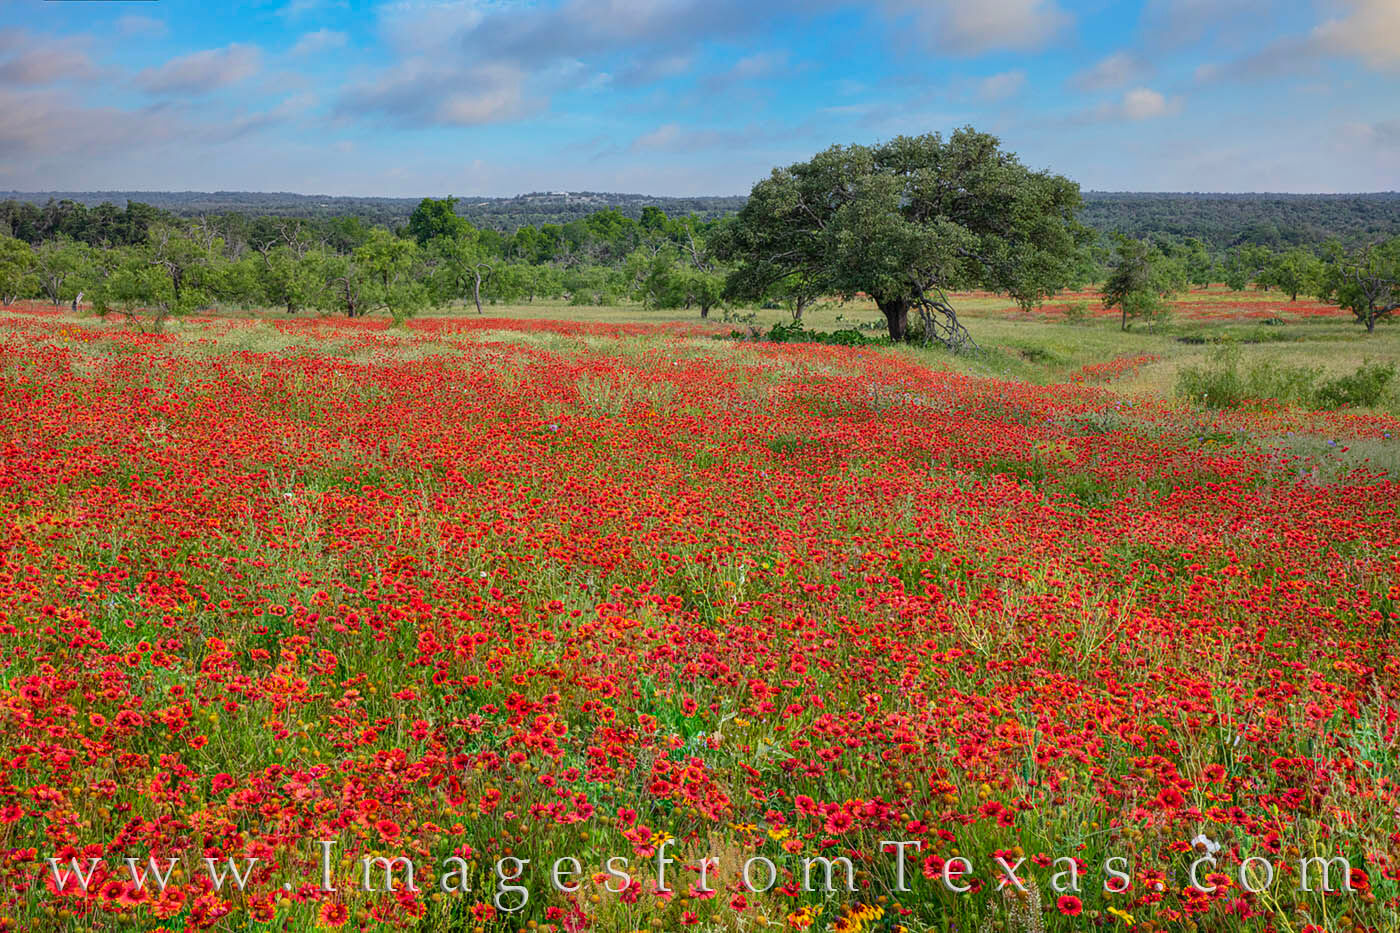 A field of red wildflowers tumbles across the hills and into the distance on a late Spring afternoon.